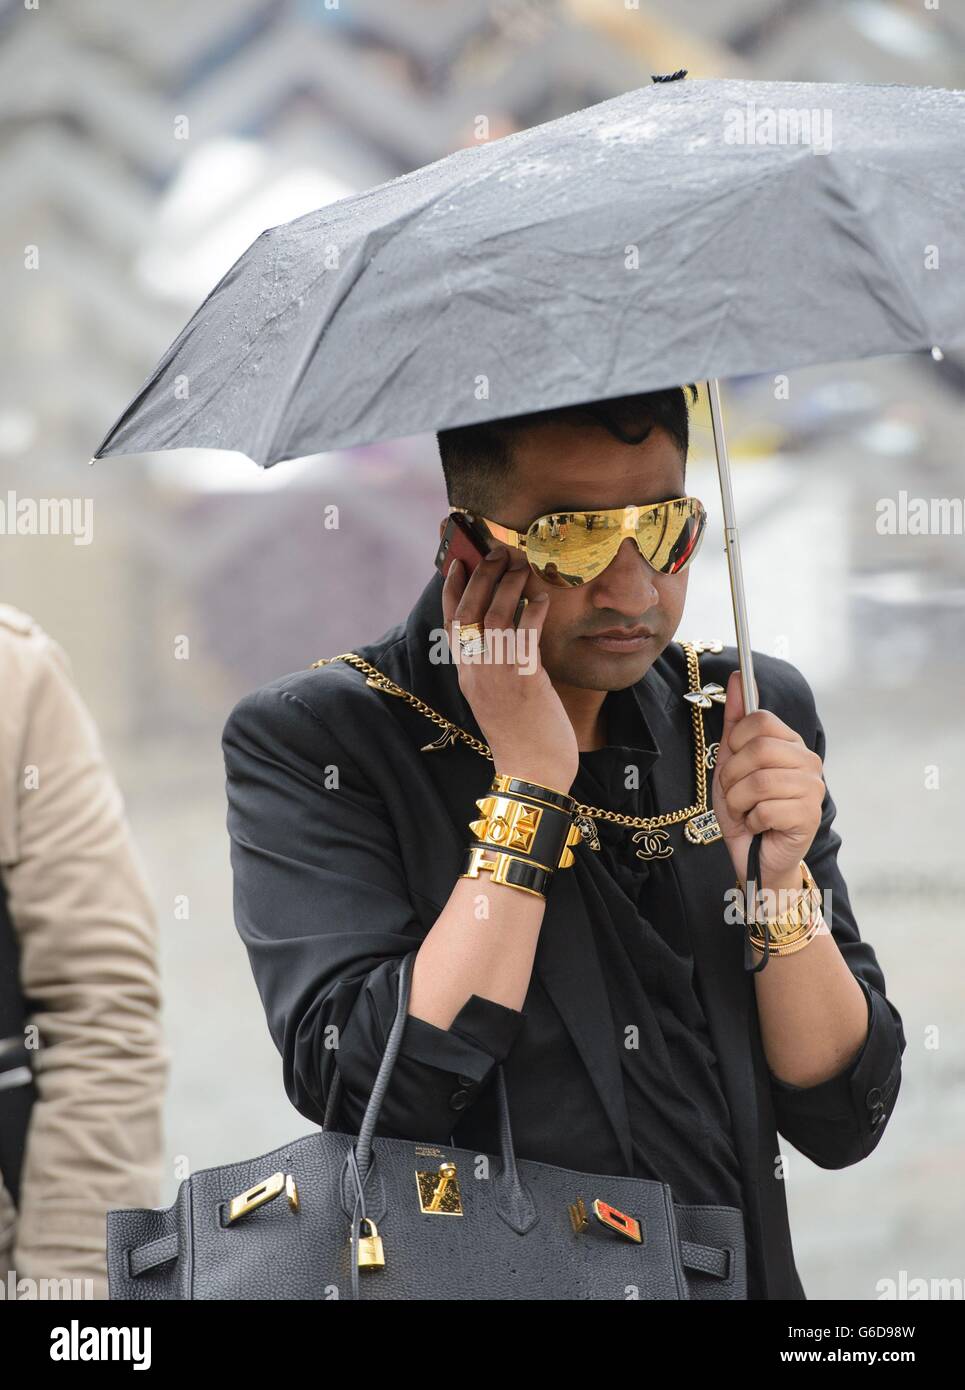 Arrivals - London Fashion Week 2013. An attendee shelters from the rain at Somerset House, central London, during London Fashion Week 2013. Stock Photo